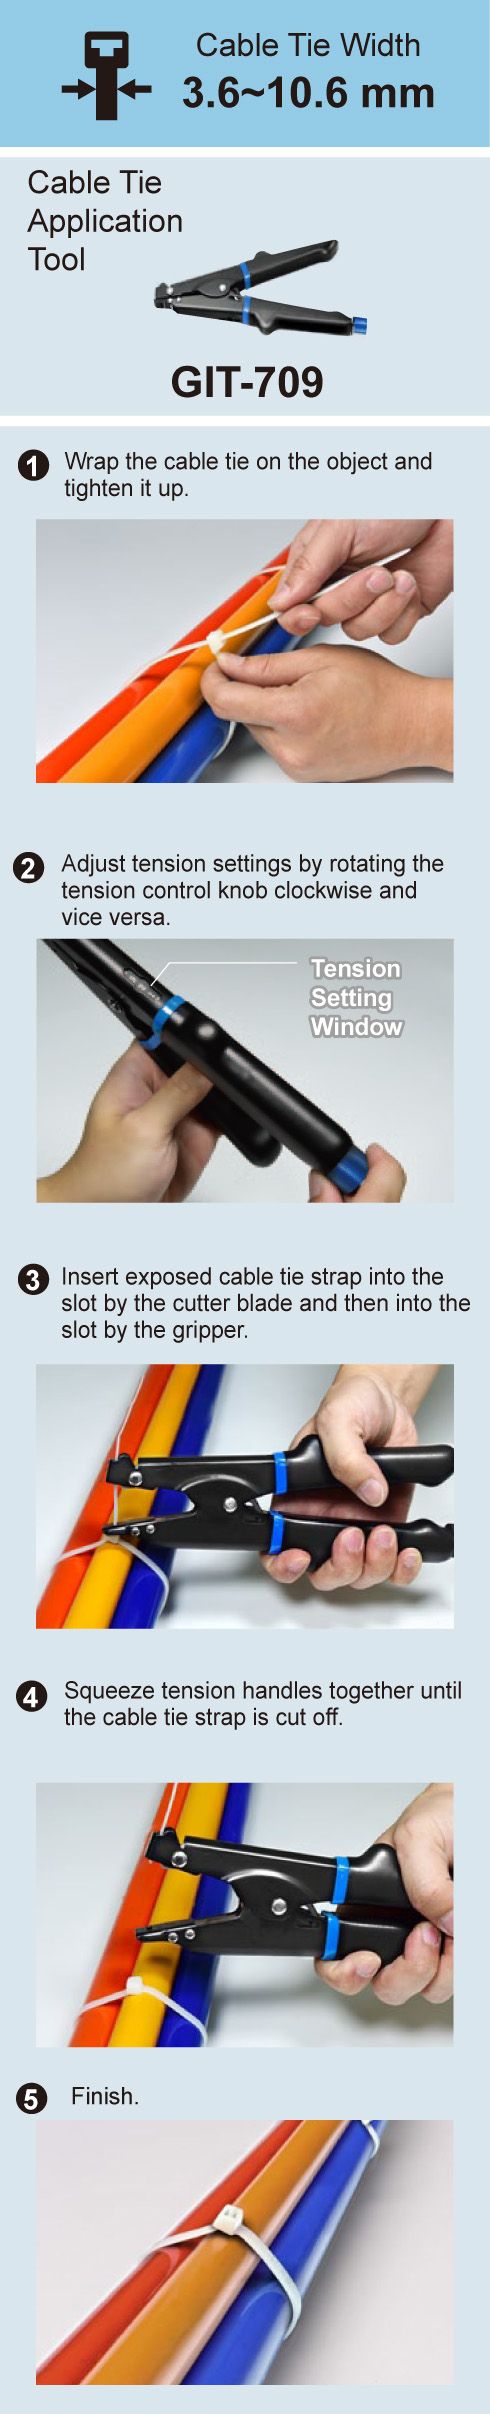 Operating Instructions of Plastic Cable Ties with GIT-709